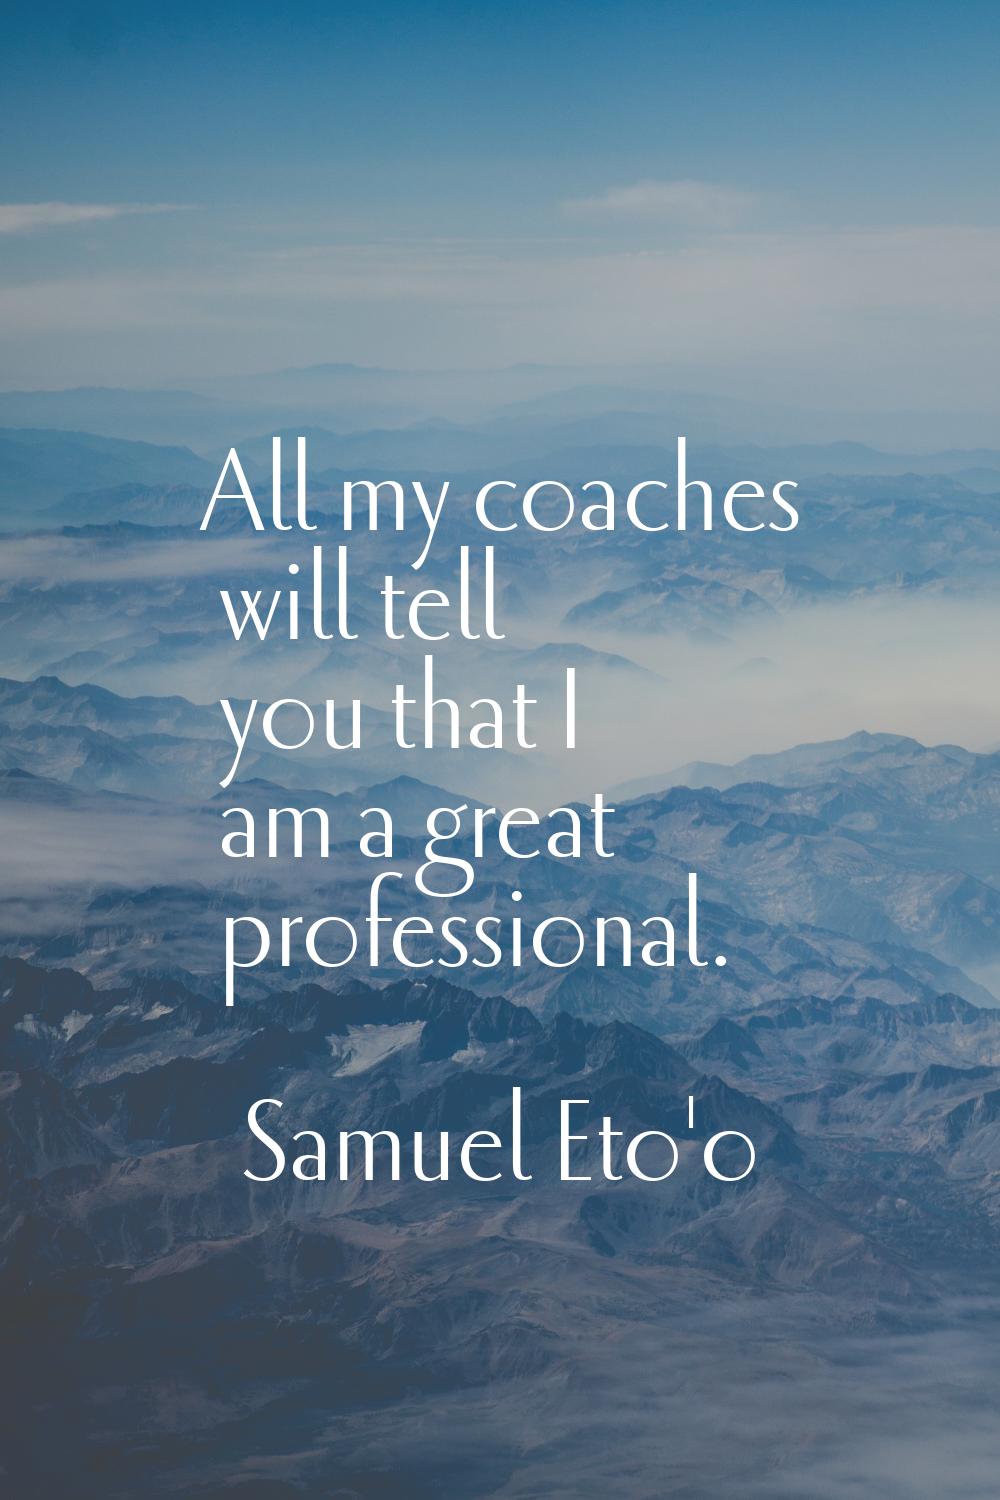 All my coaches will tell you that I am a great professional.